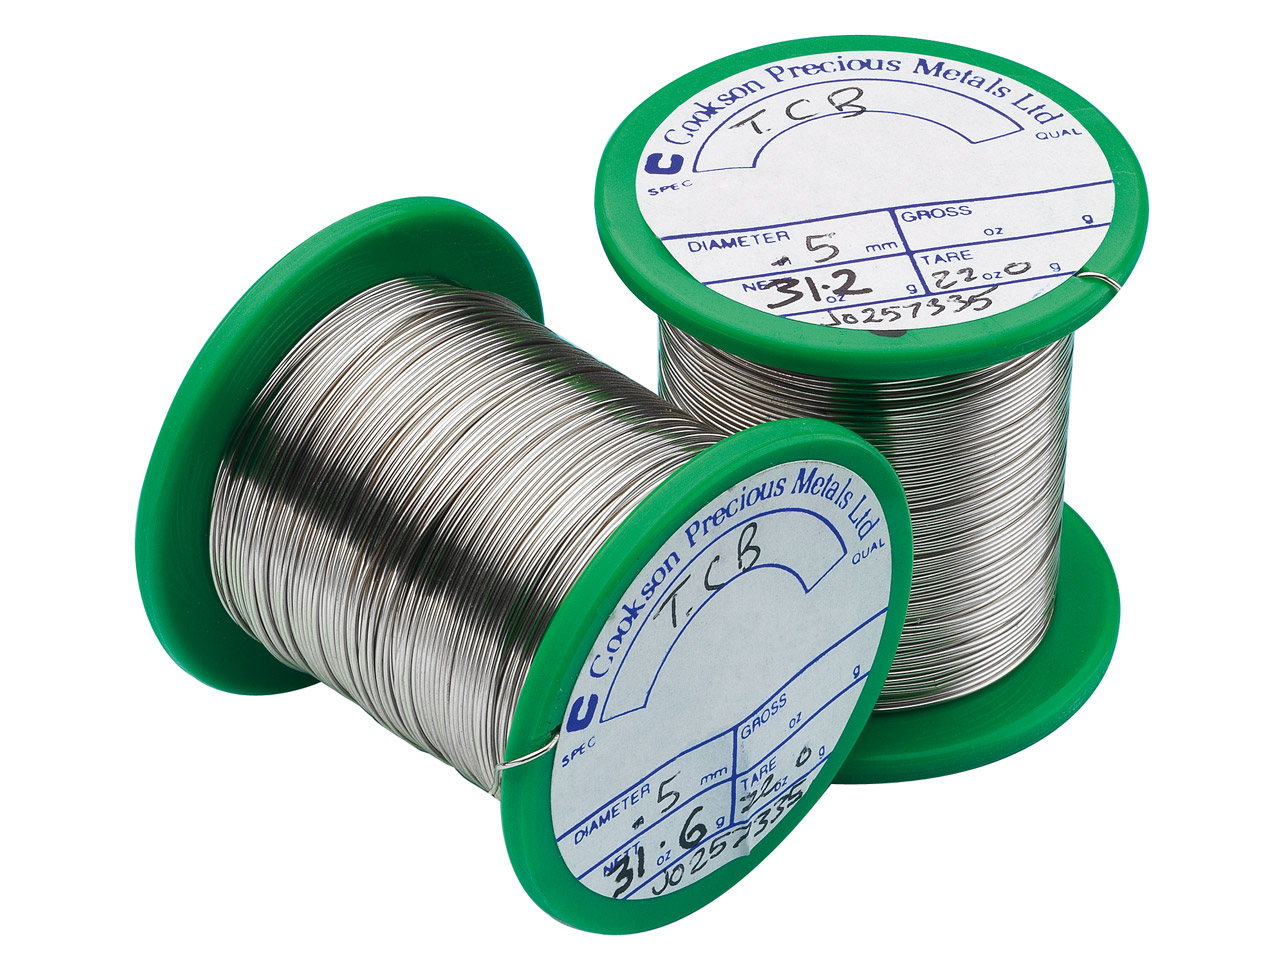 Extra Easy Silver Solder Wire 1.00mm Fully Annealed, 30g Reels, 100% Recycled Silver Questions & Answers